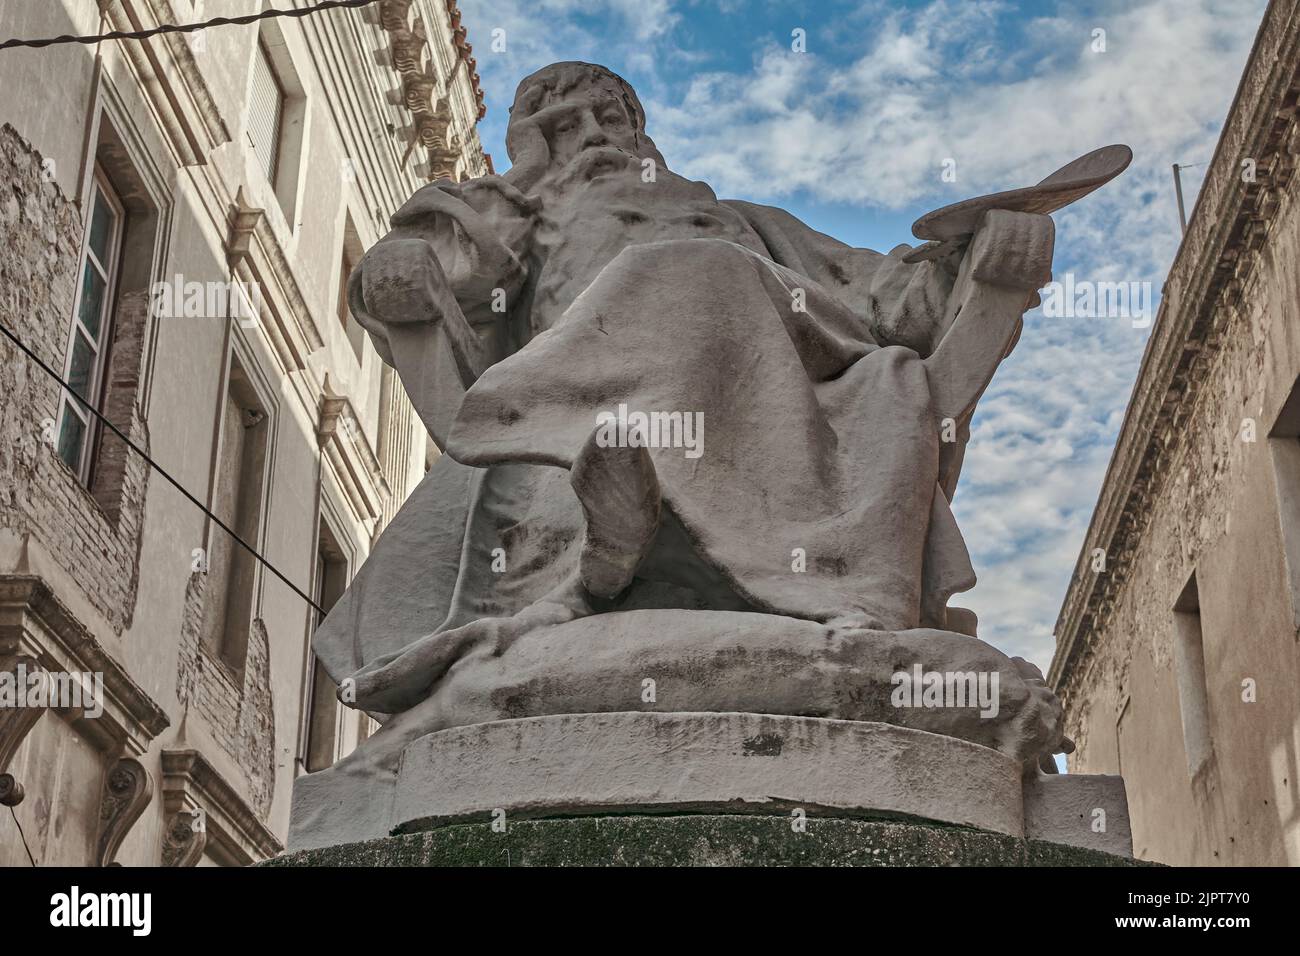 FIGUERES, SPAIN - FEBRUARY 27, 2022:, Statue of Jean-Louis meissonier outside Salvador Dali theater museum in figueres,Spain. Stock Photo